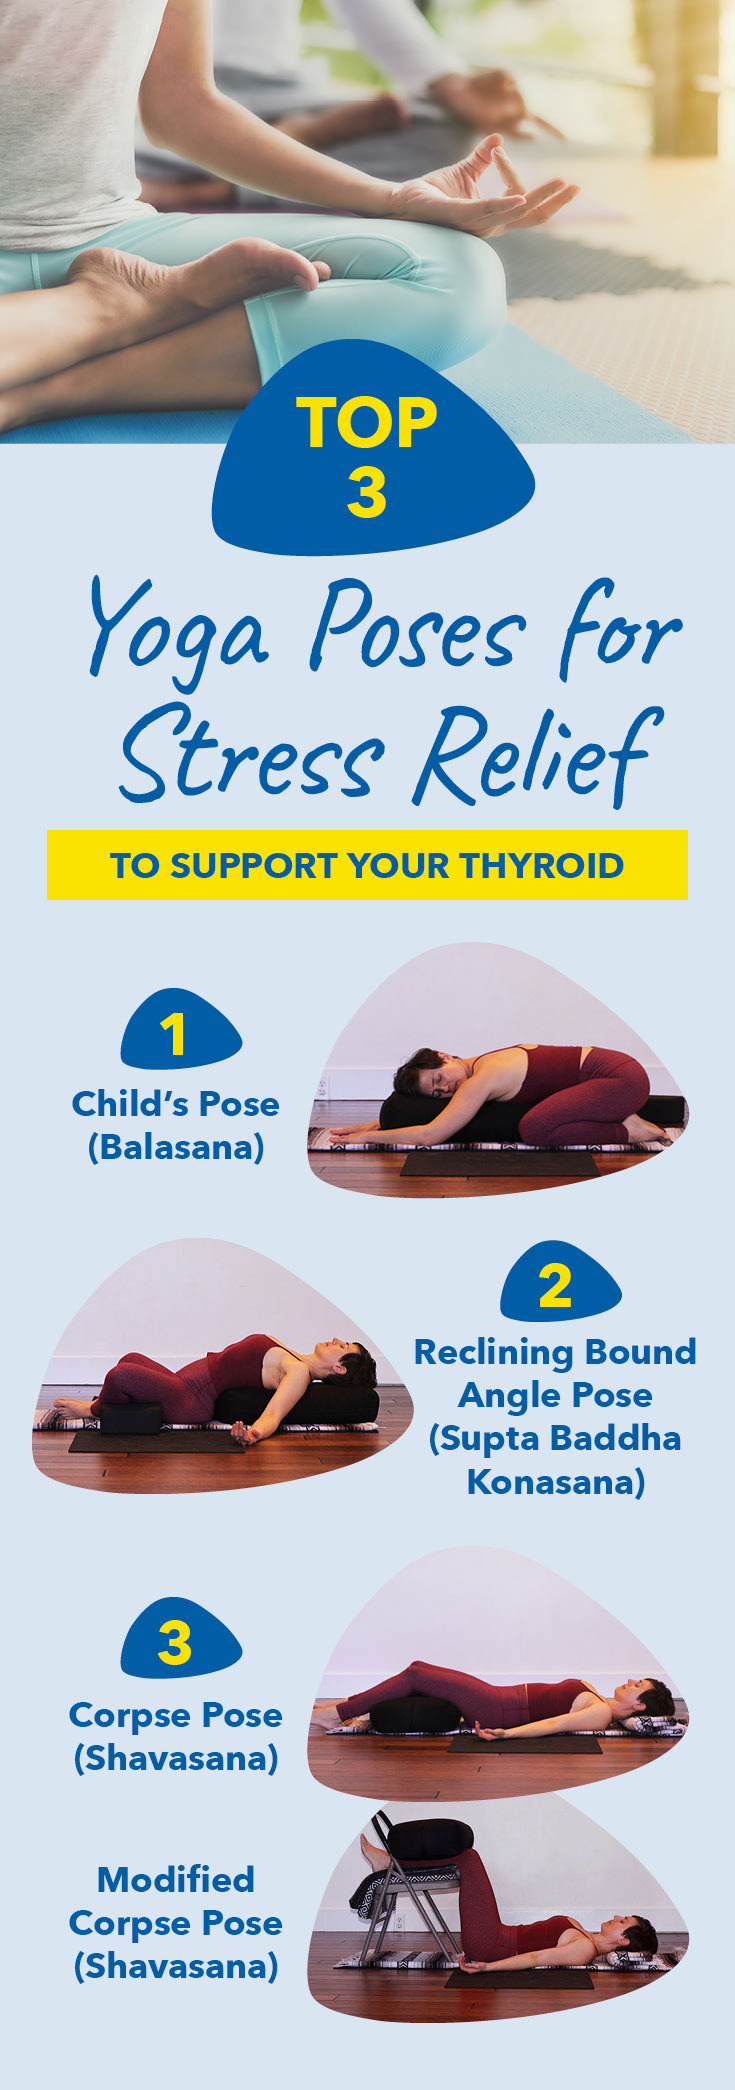 Is Thyroid Troubling You? Yoga Can Help